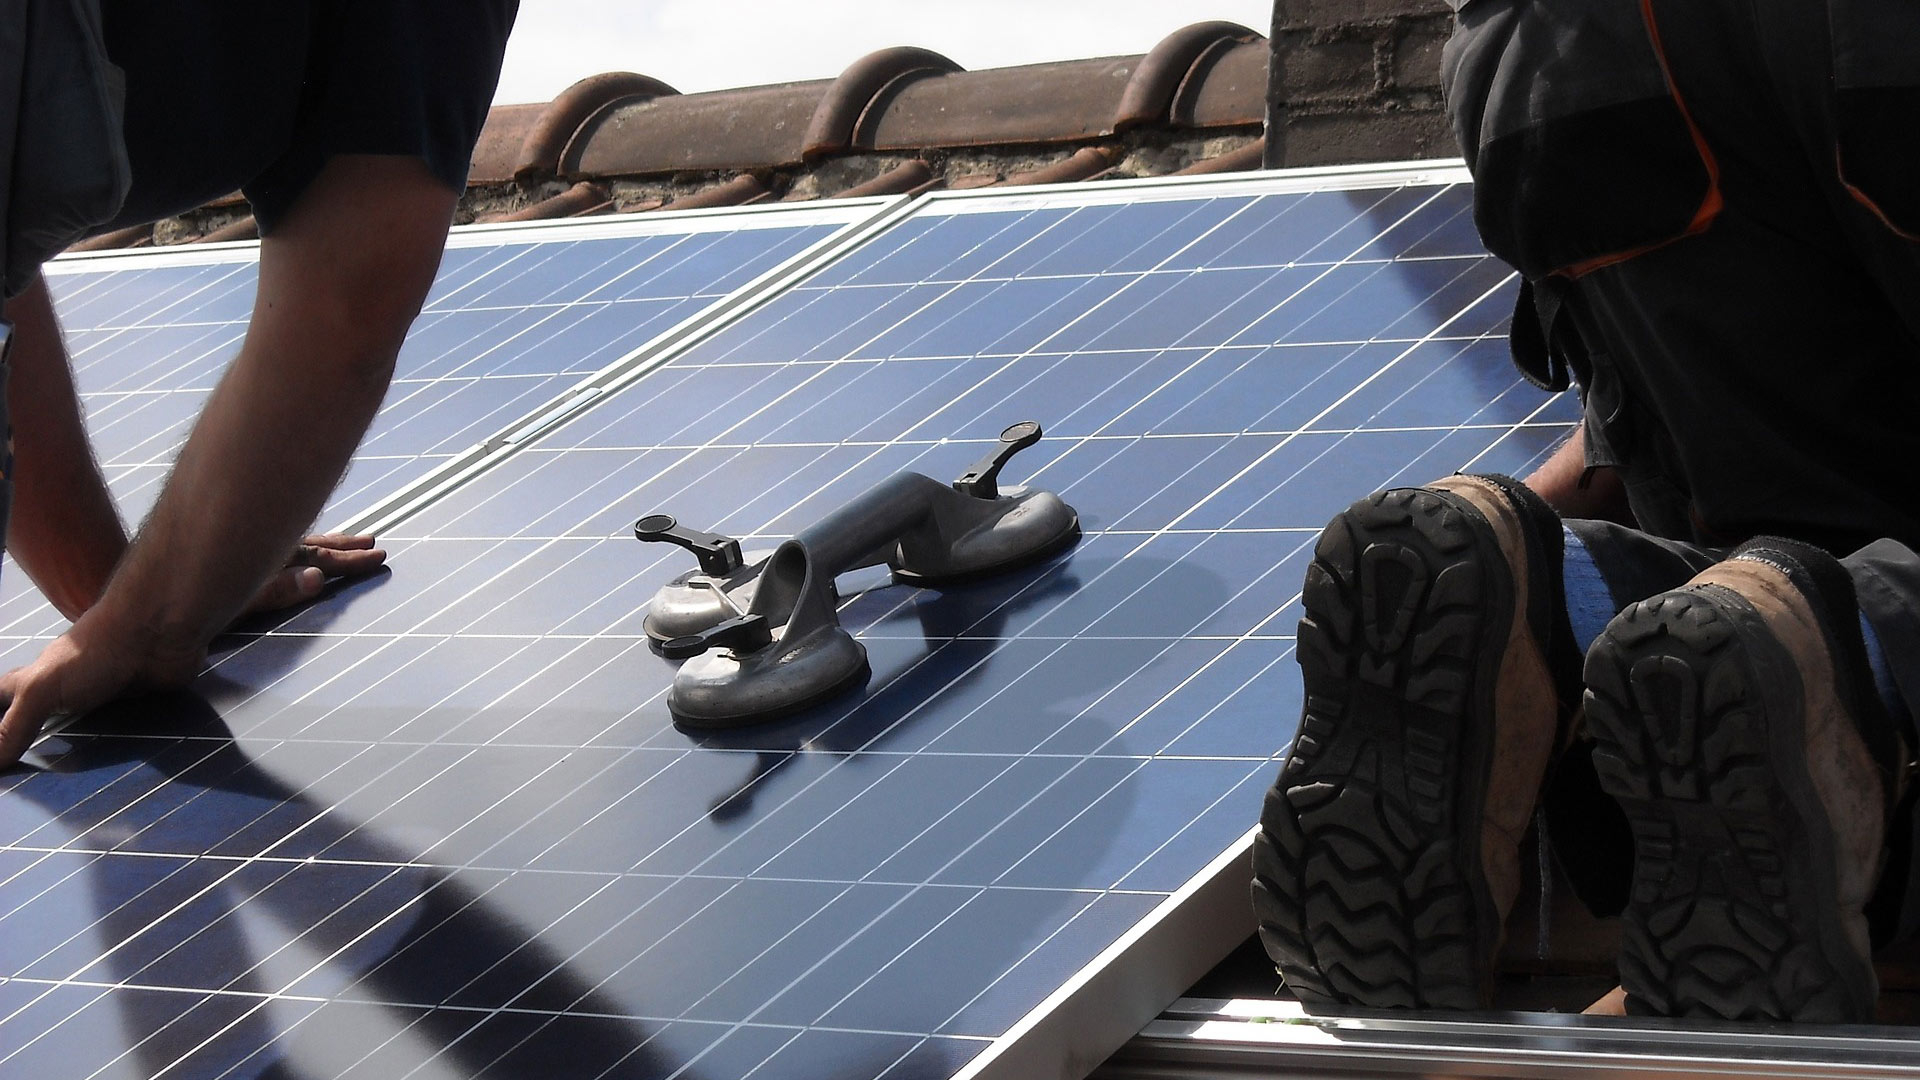 Workers install solar panels on a rooftop.